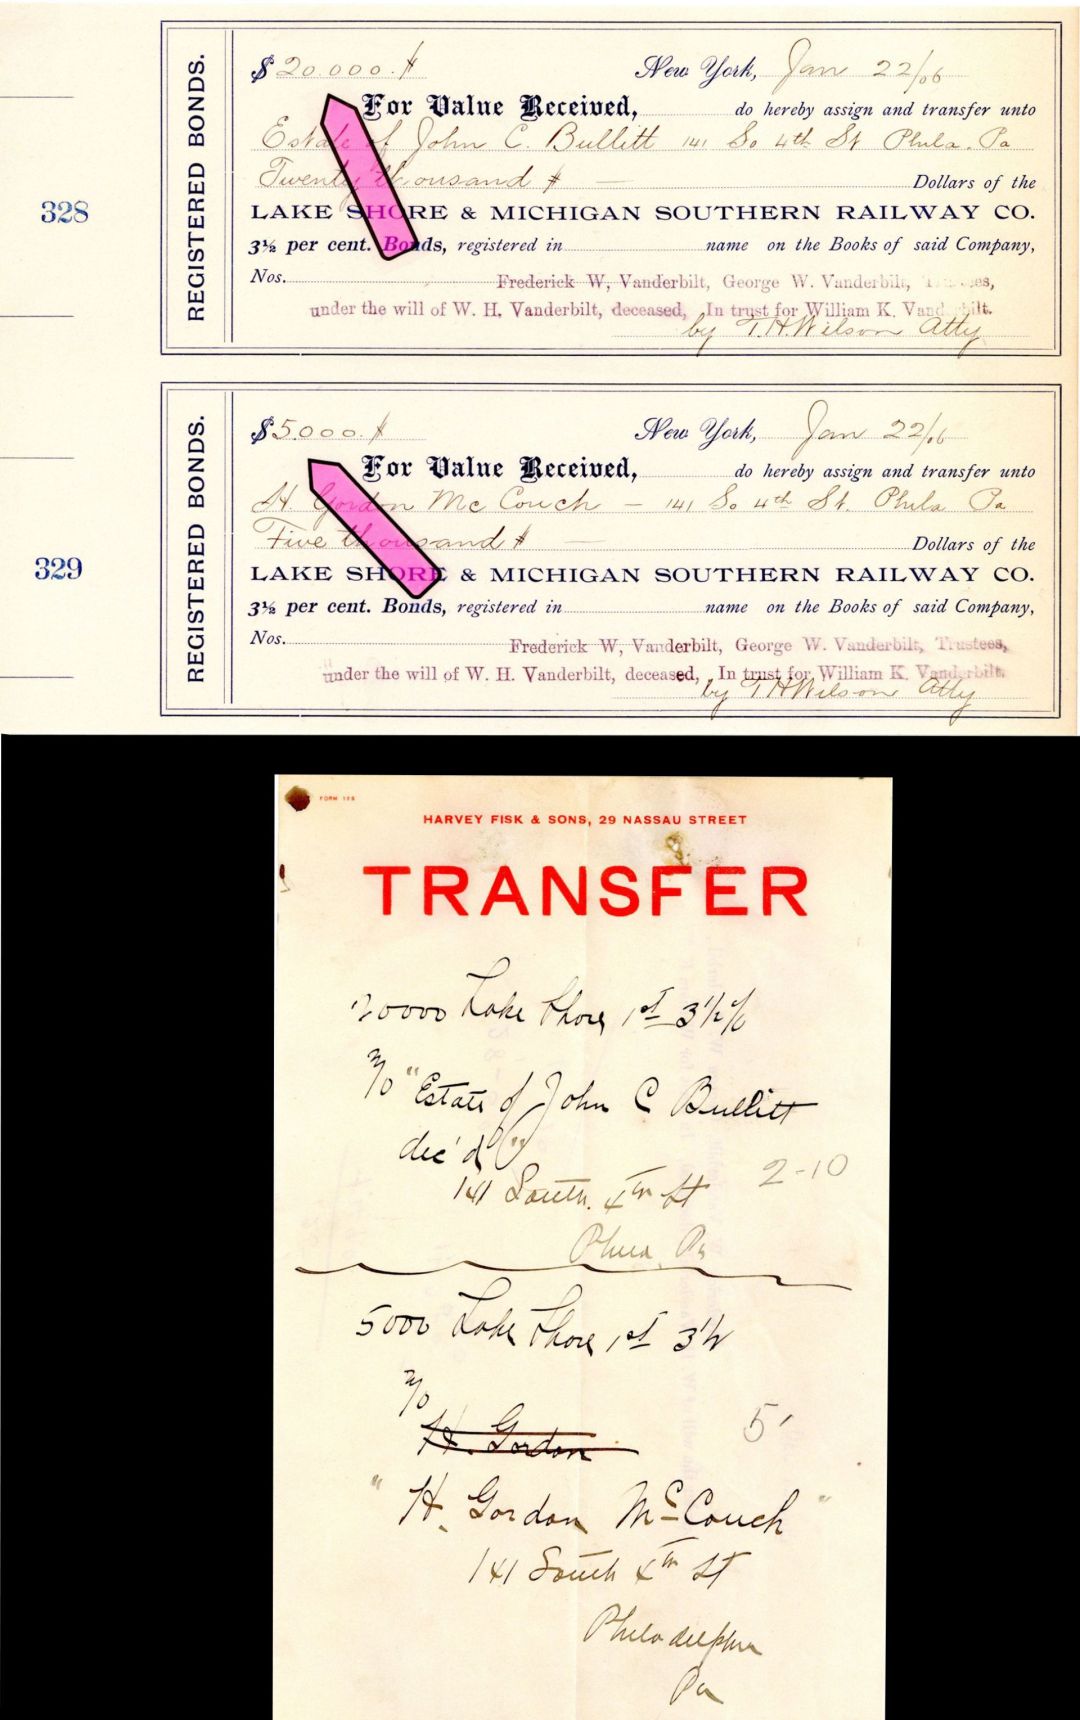 $20,000 and $5,000 Lake Shore and Michigan Southern Railway Co. Uncut Receipt mentioning 2 Vanderbilts! -  1906 dated Stock Transfer and Uncut Receipts